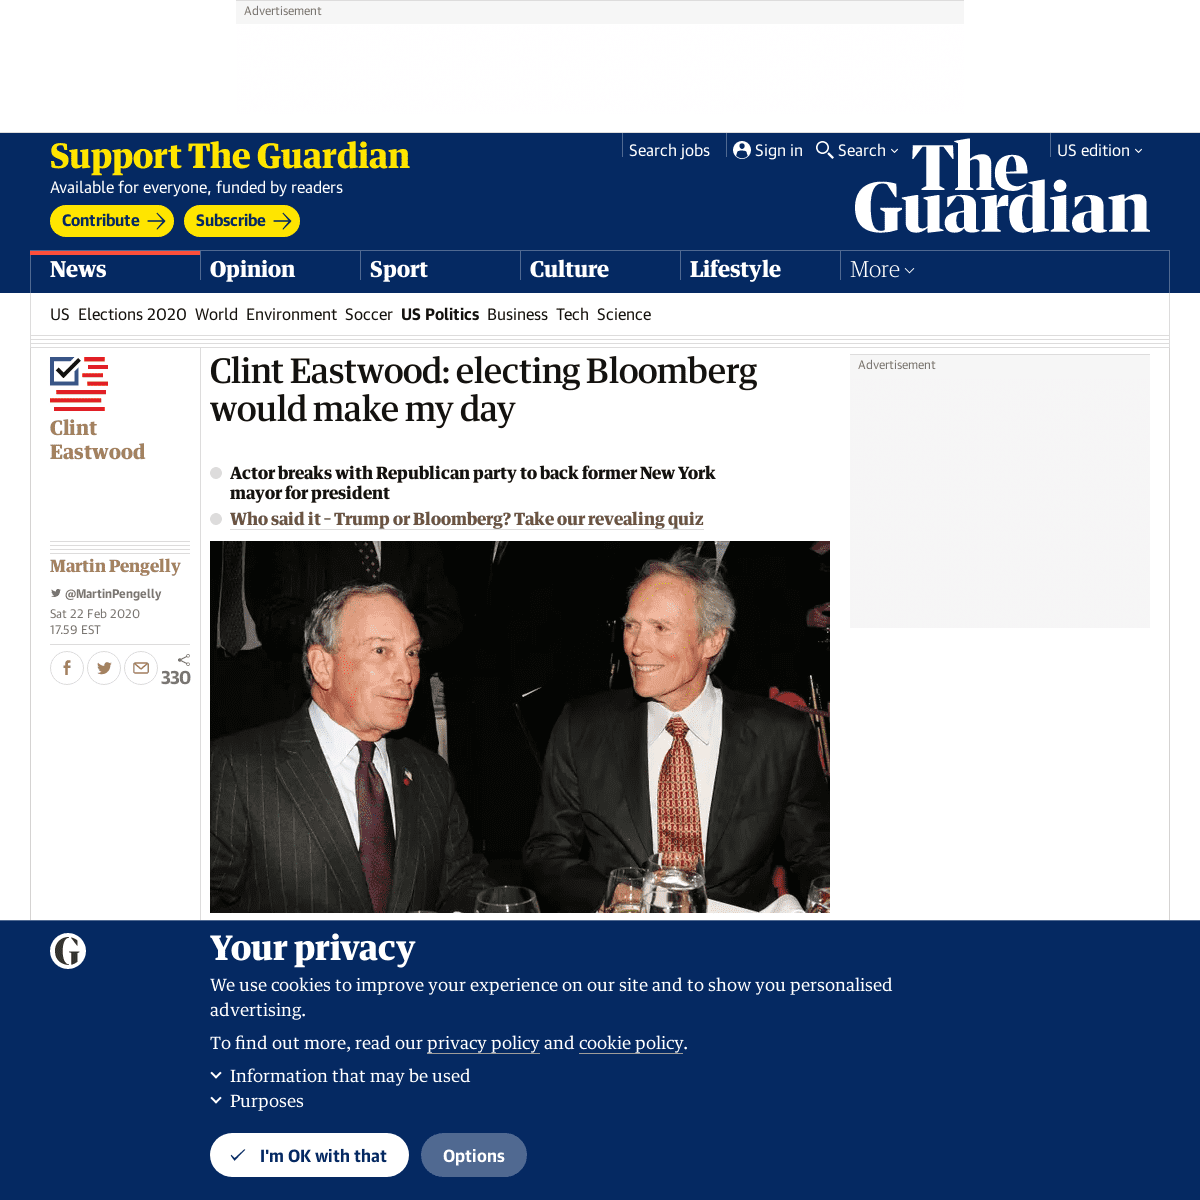 A complete backup of www.theguardian.com/film/2020/feb/22/clint-eastwood-bloomberg-president-trump